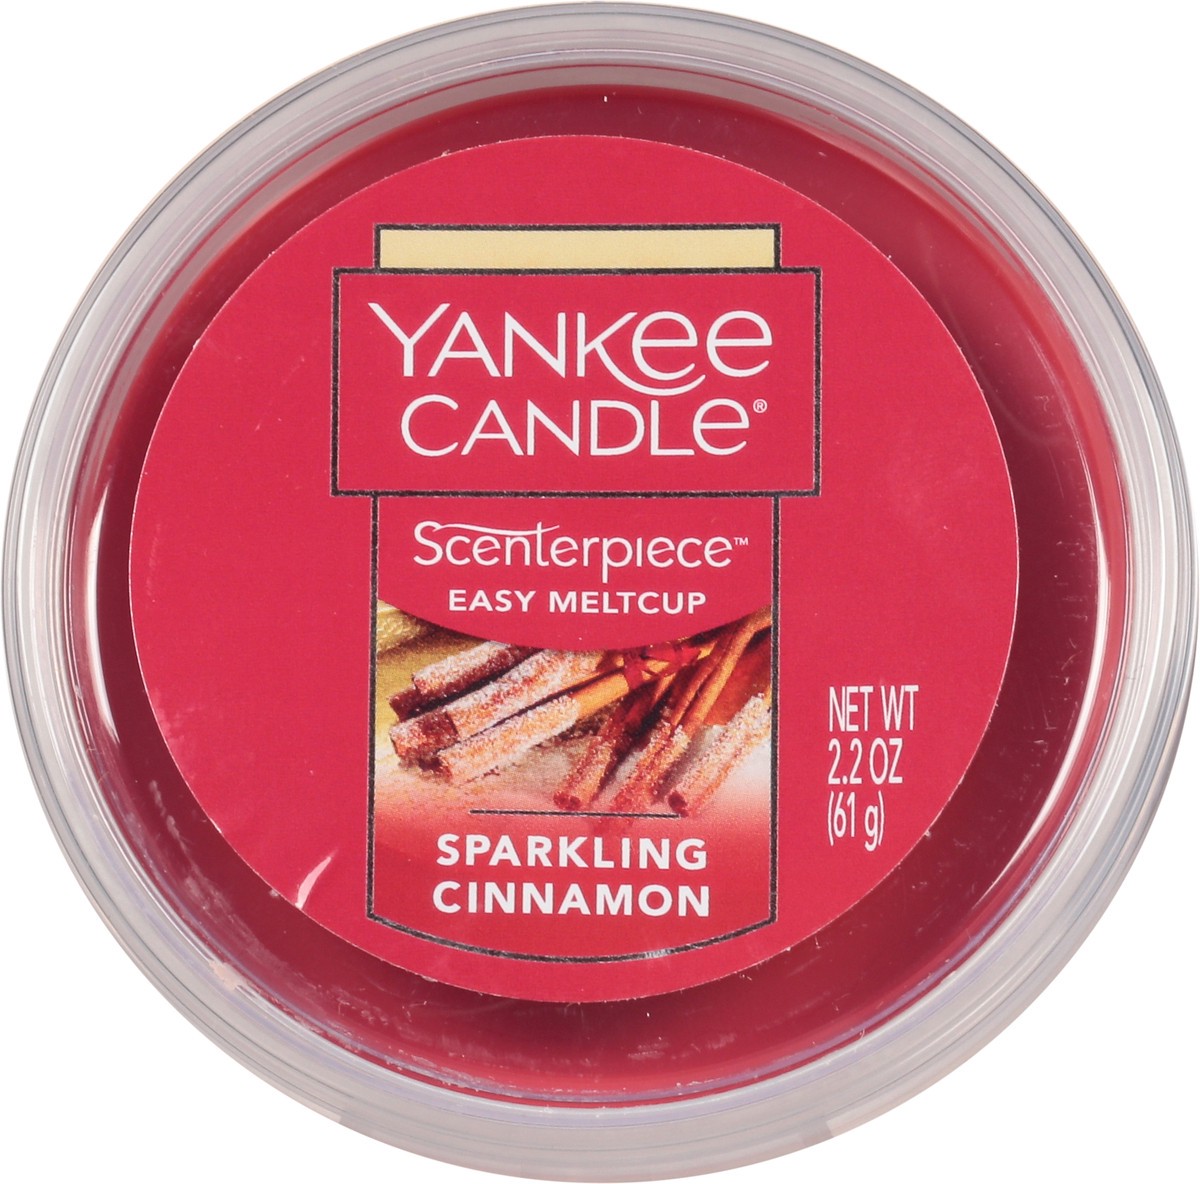 slide 4 of 11, Yankee Candle Scenterpiece Sparkling Cinnamon Easy MeltCup 1 ea, 1 ct